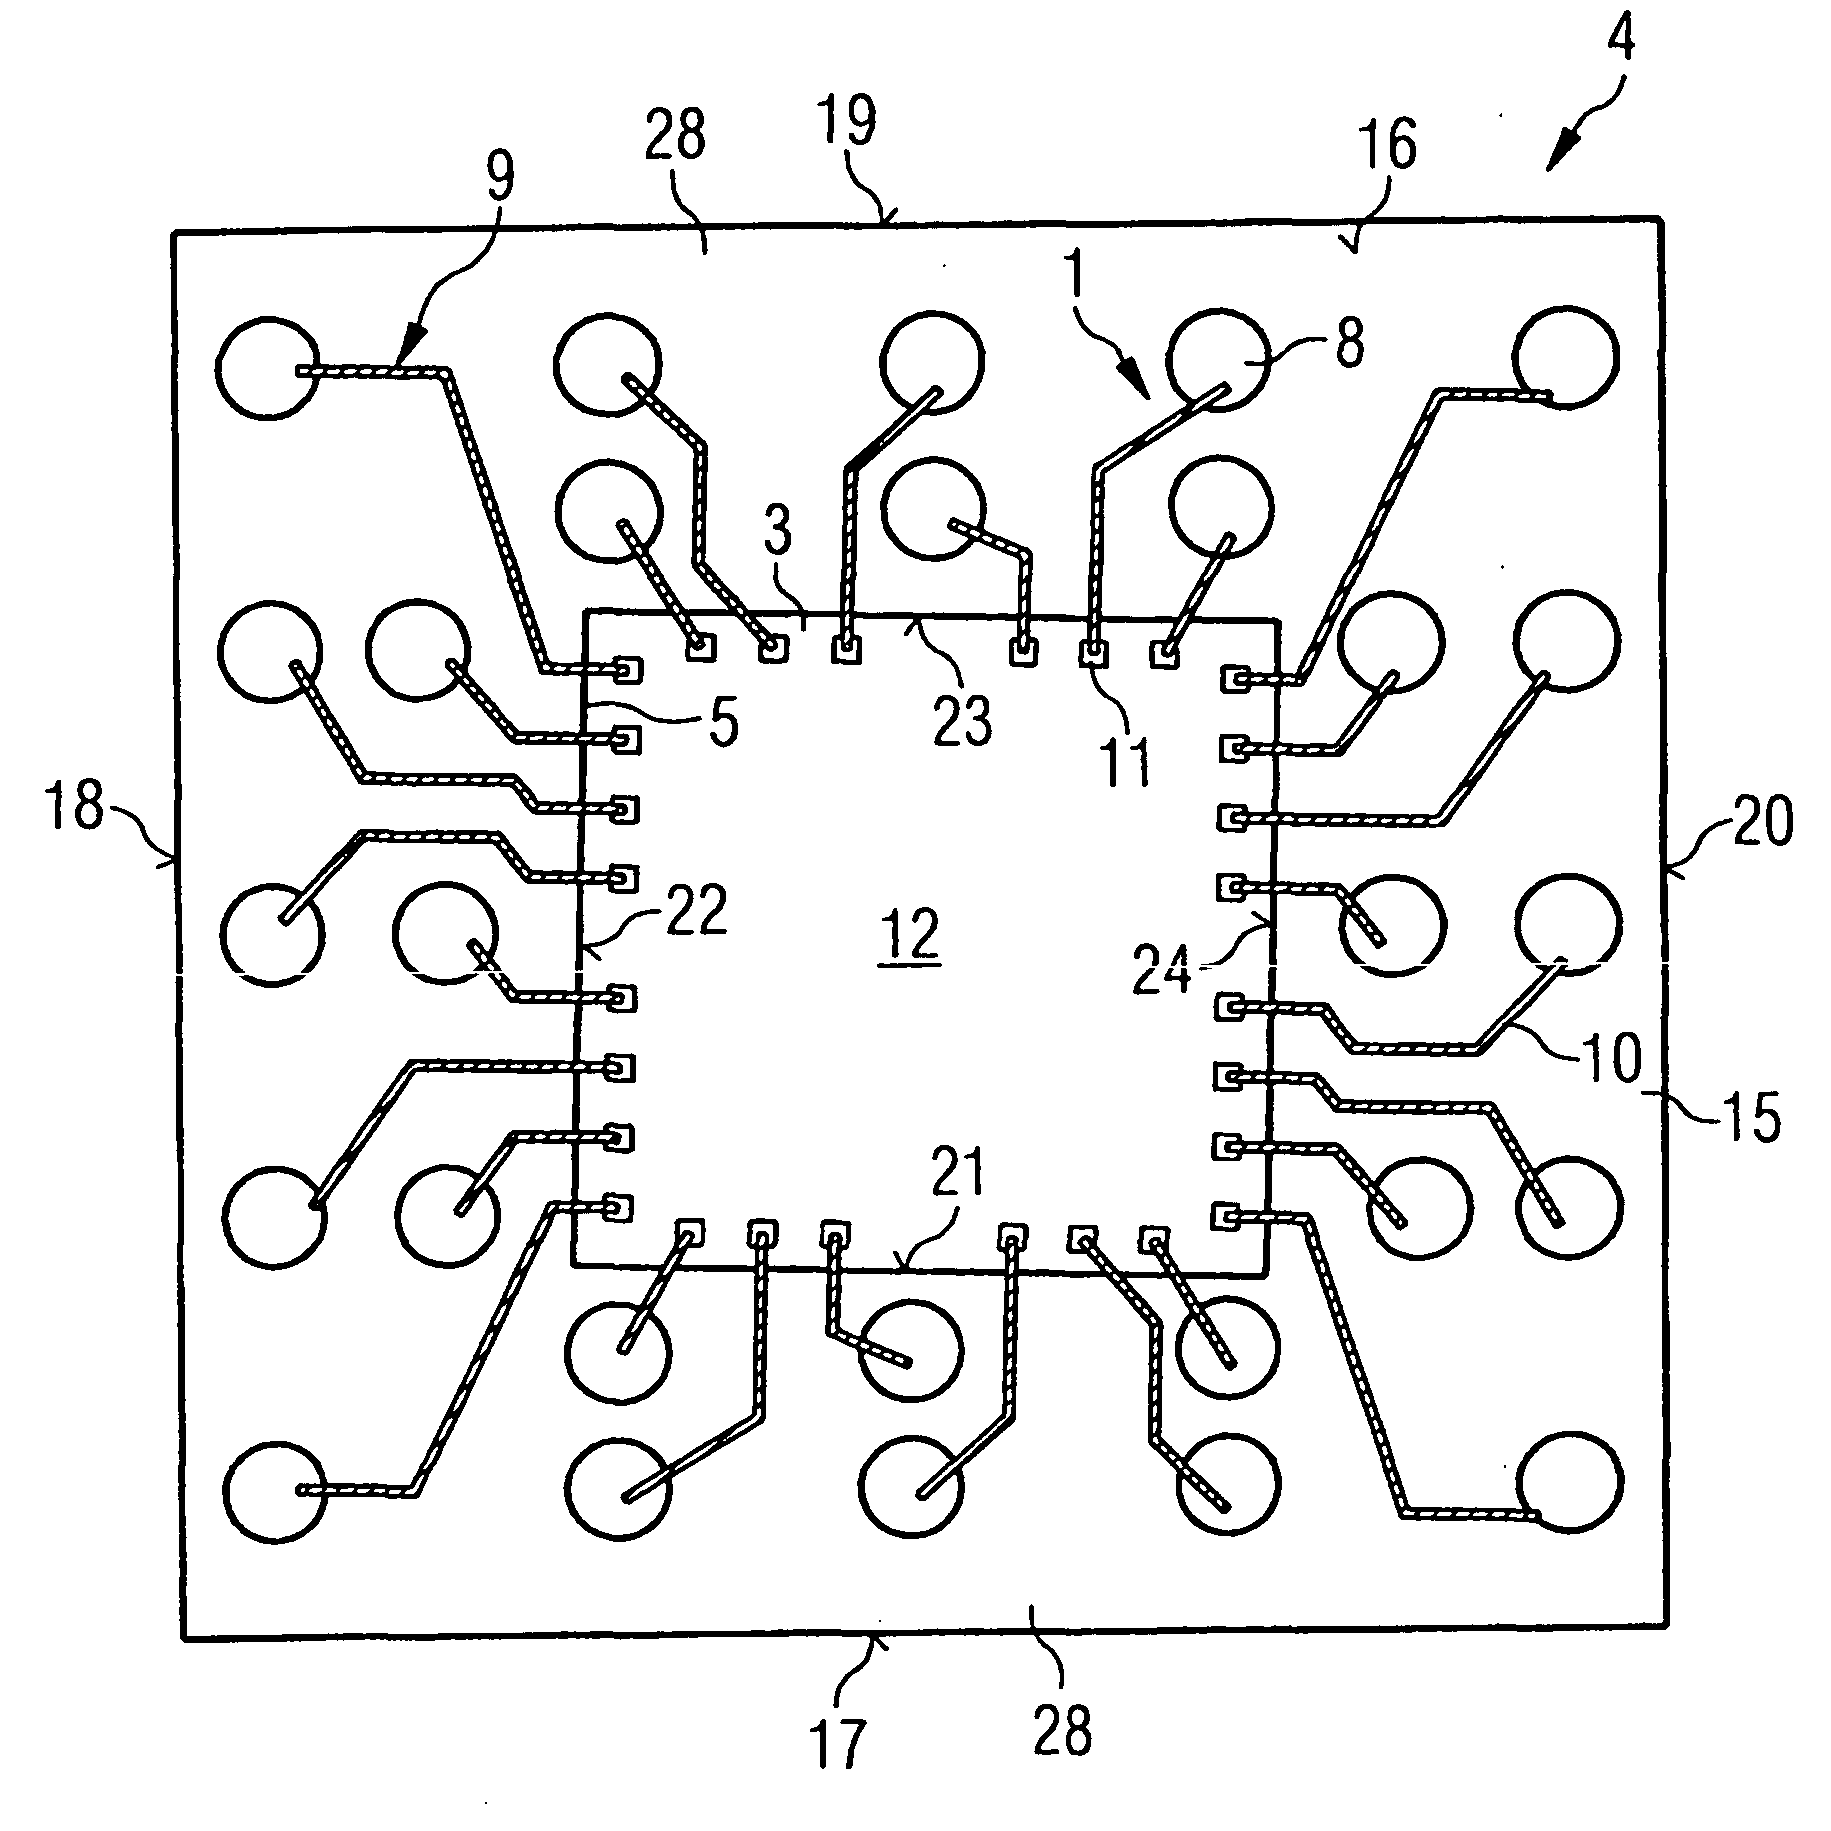 Method for Applying Rewiring to a Panel While Compensating for Position Errors of Semiconductor Chips in Component Positions of the Panel